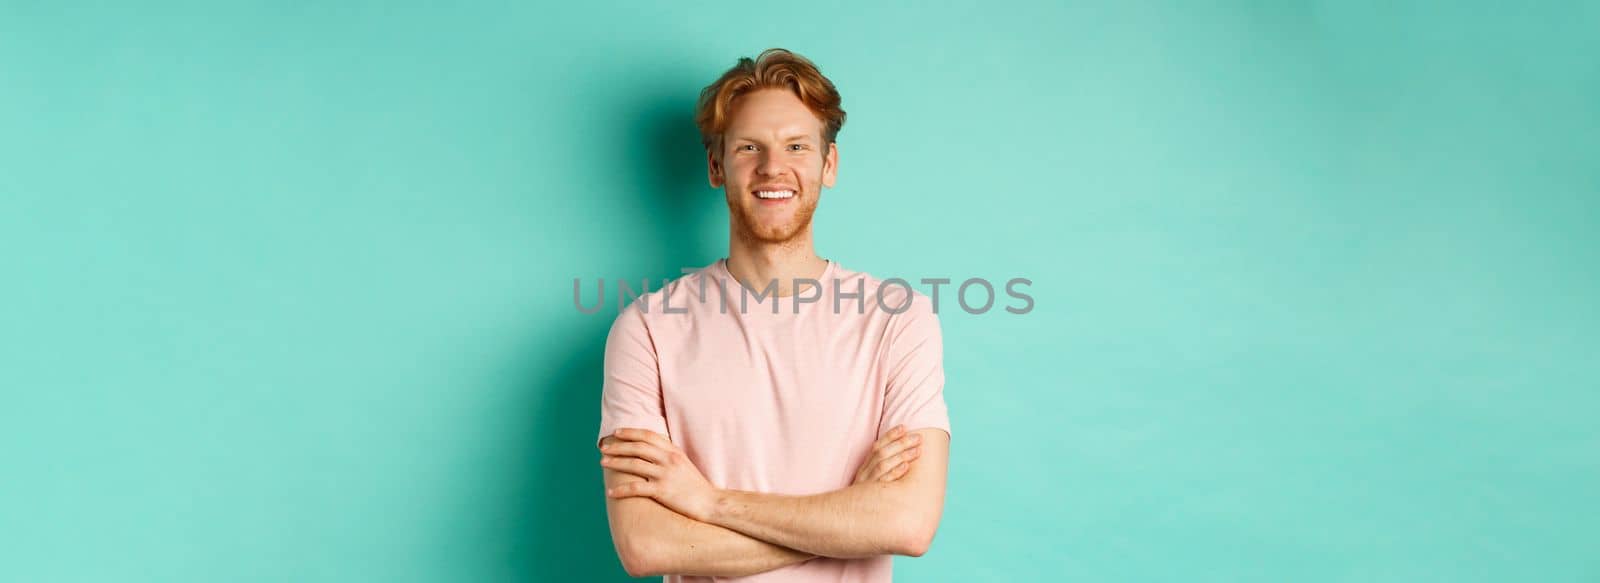 Portrait of friendly-looking young man with red hair and beard smiling and starng satisfied, holding hands crossed on chest, standing over turquoise background.